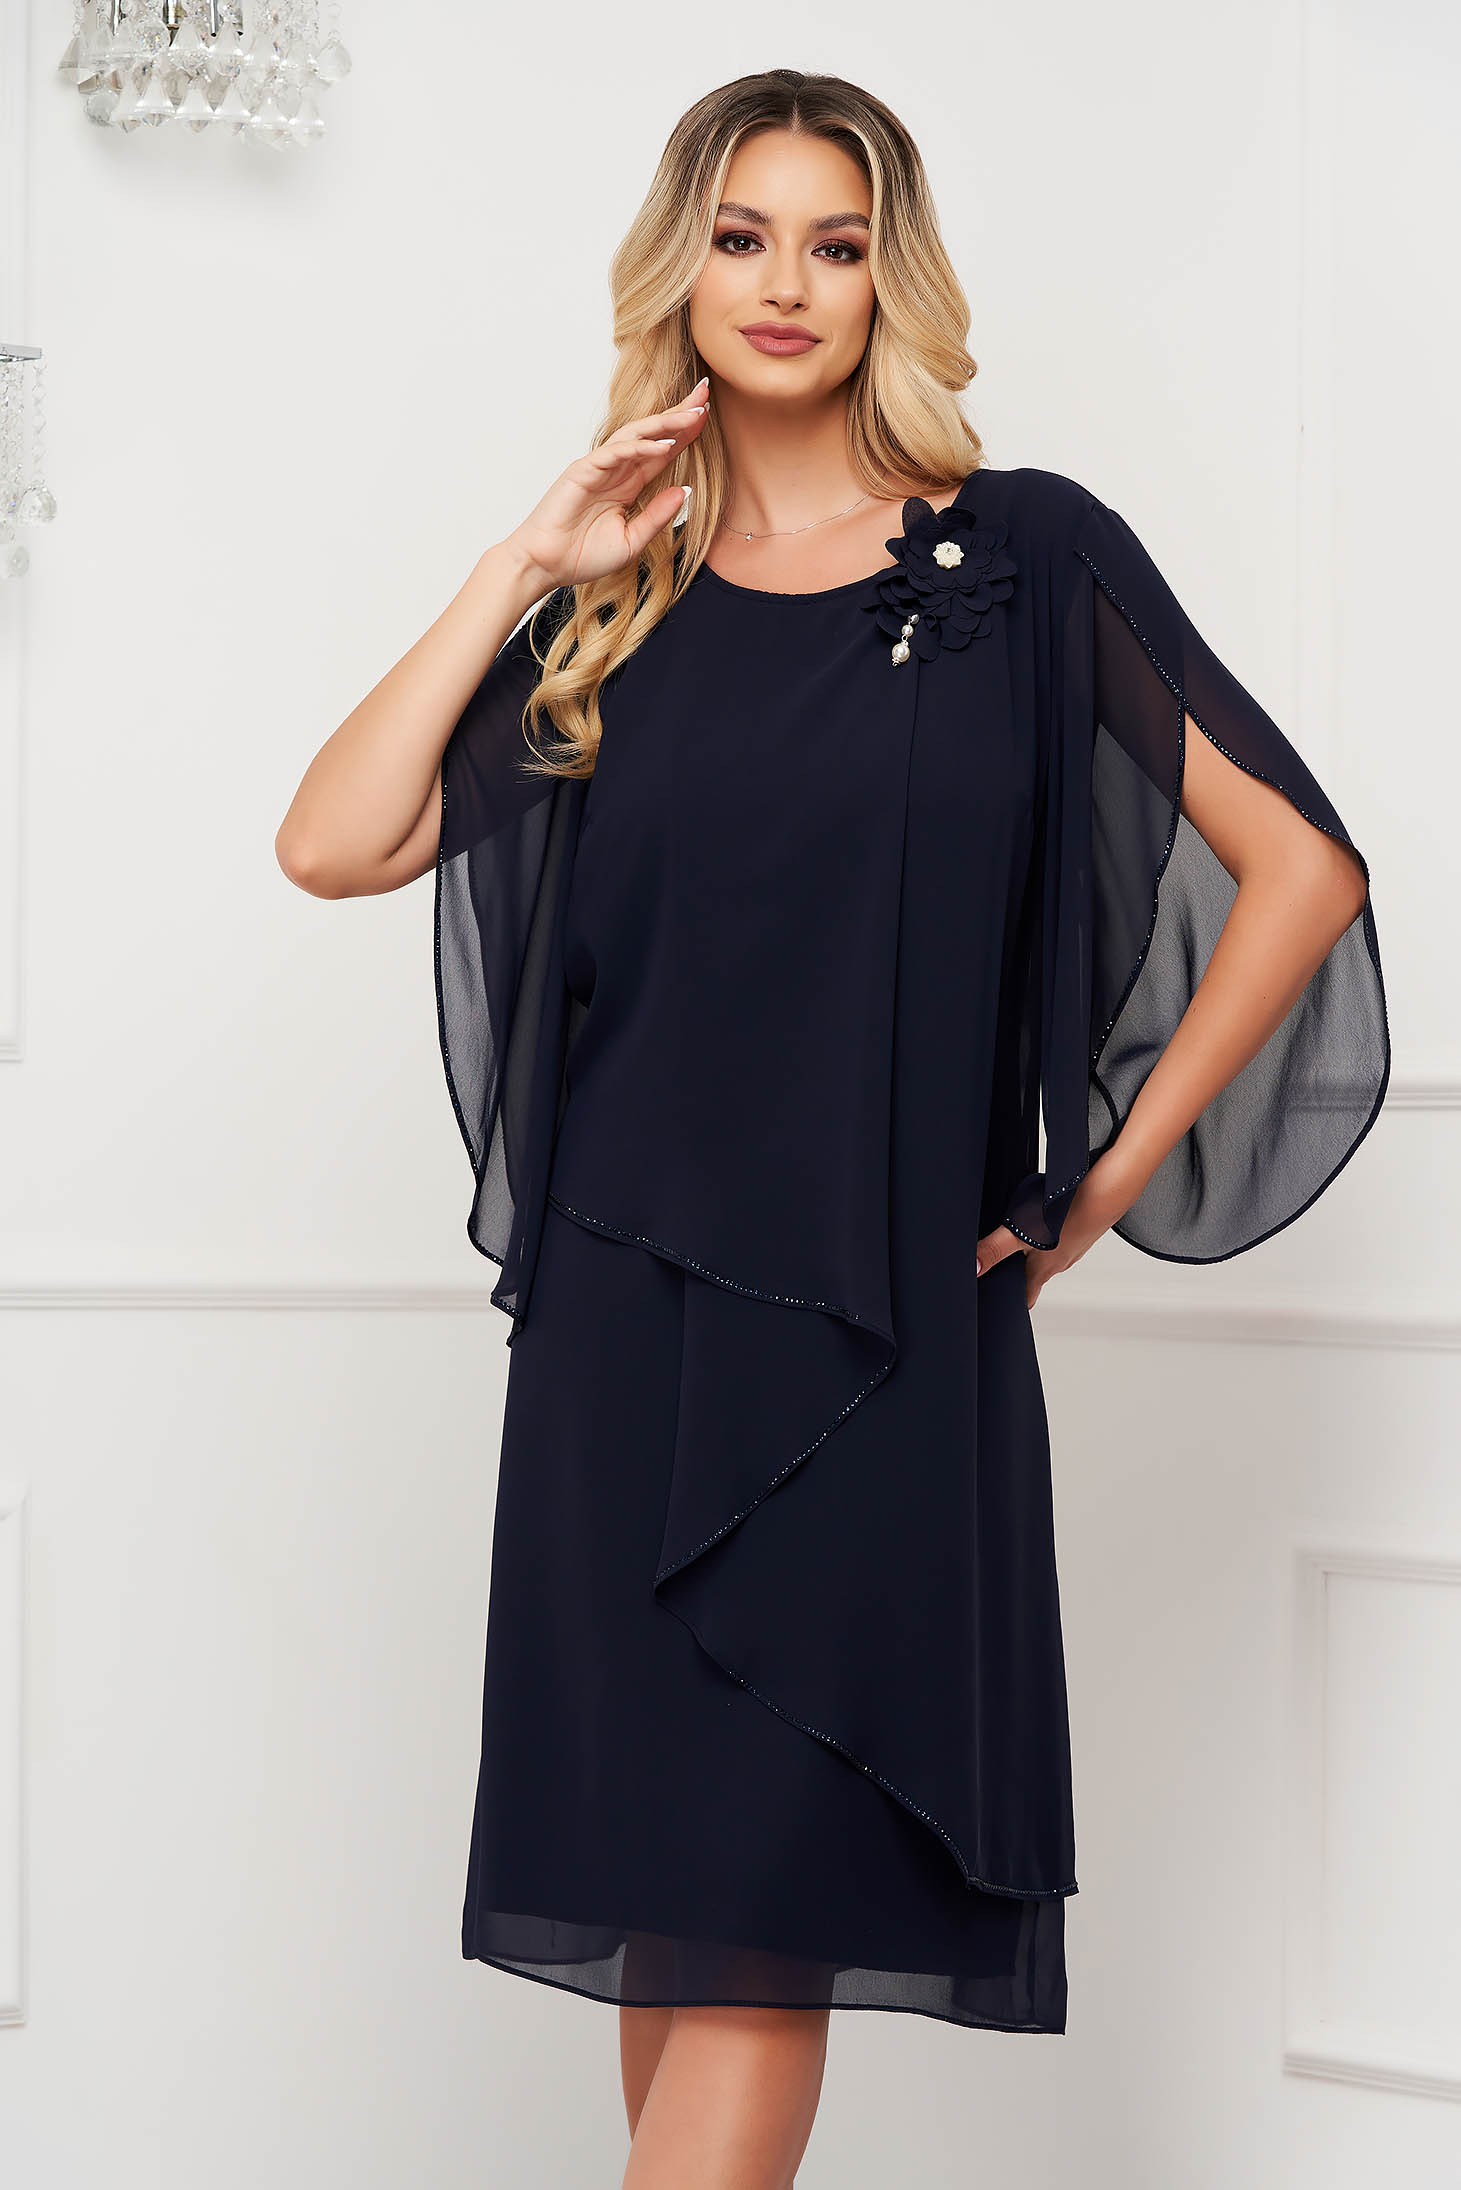 Darkblue dress from veil fabric midi loose fit accessorized with breastpin